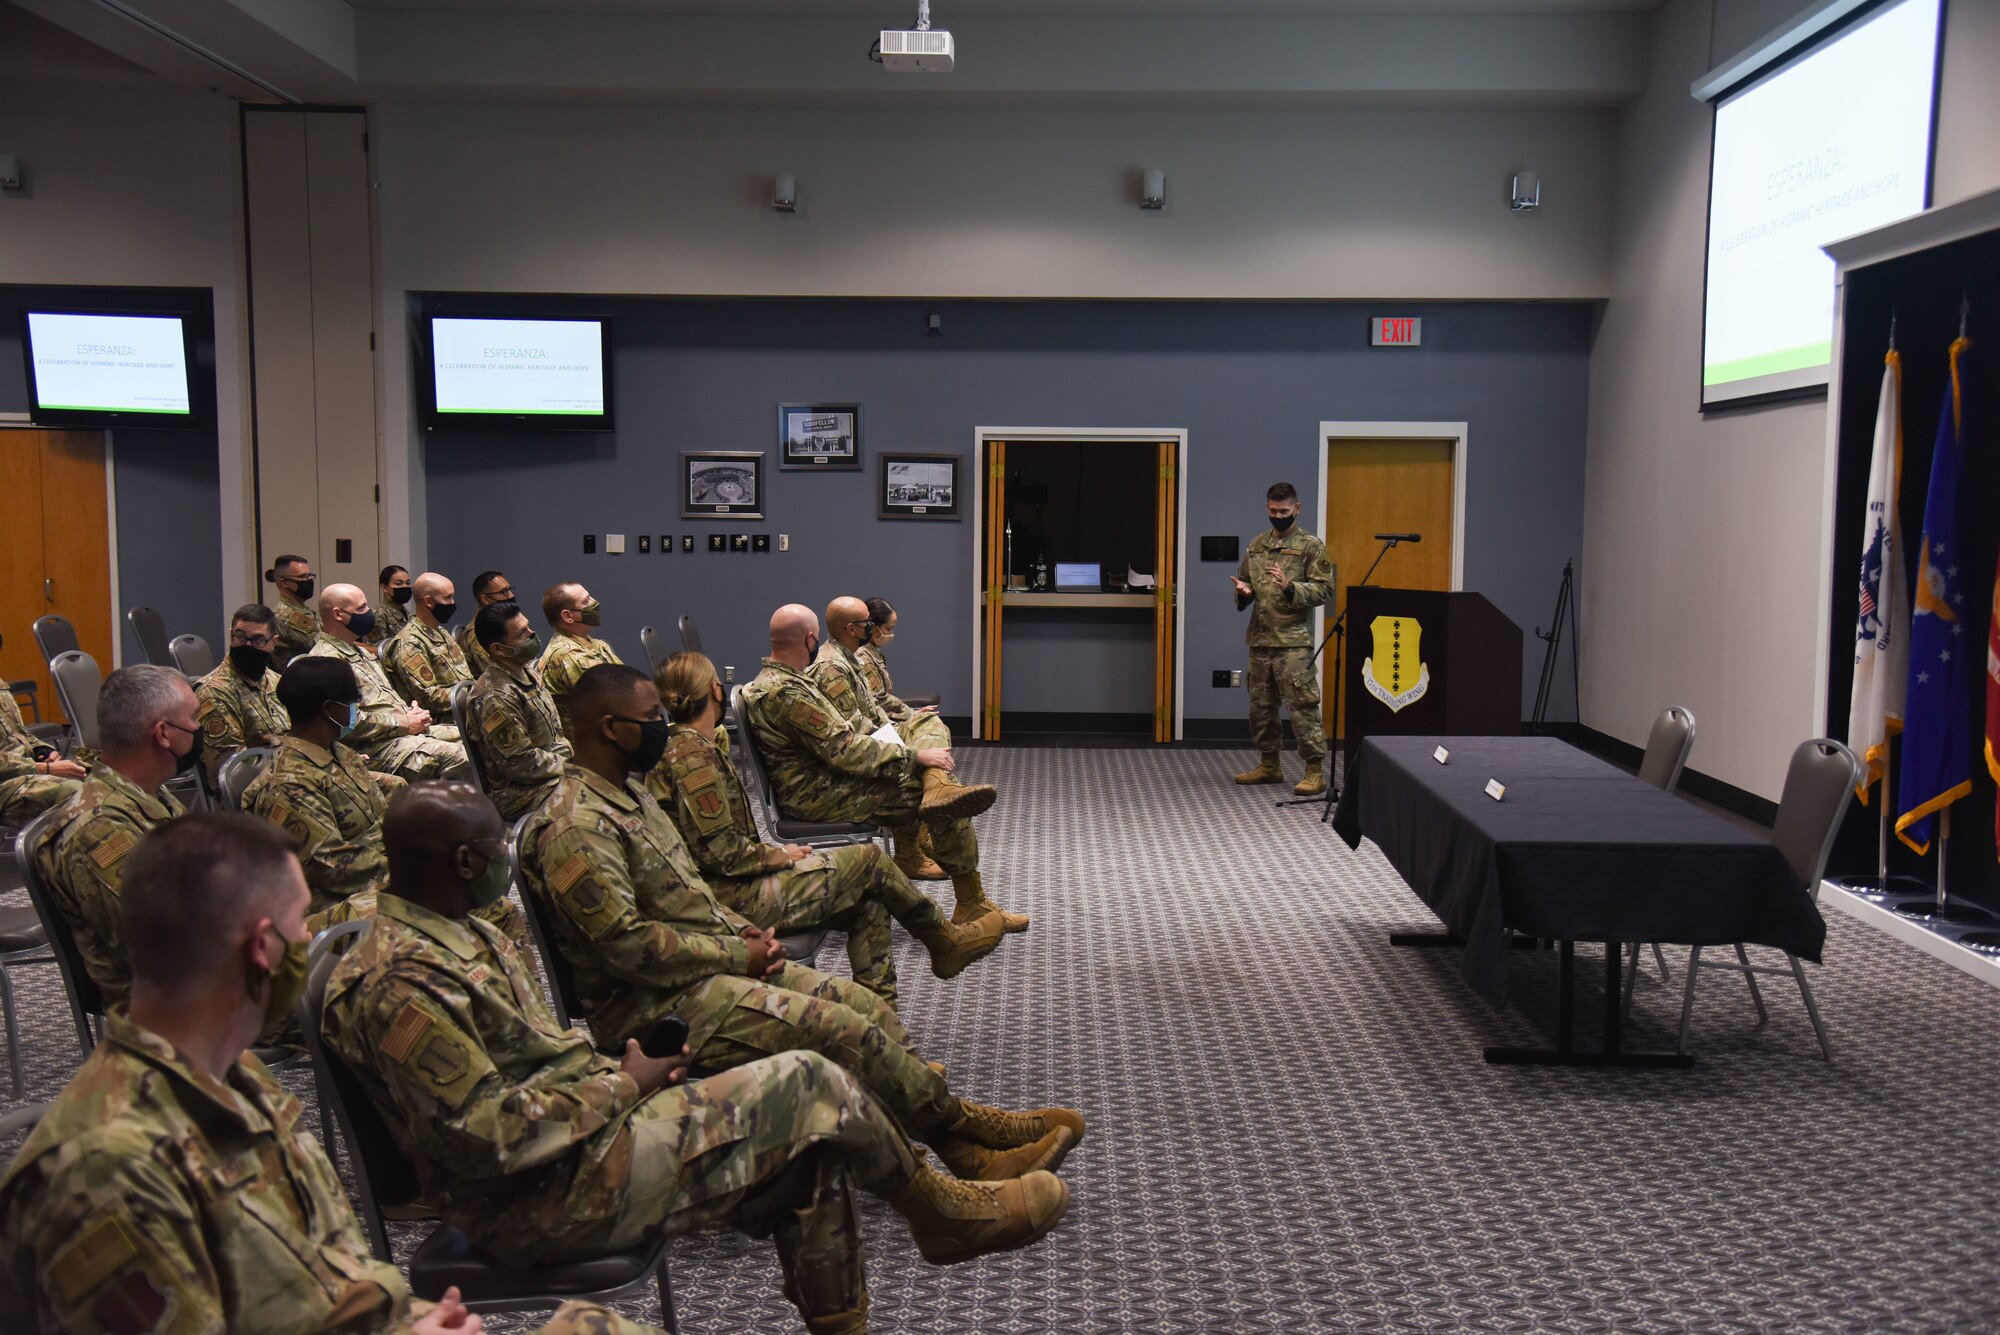 Air Force members sit and watch a photo galley presentation during an event